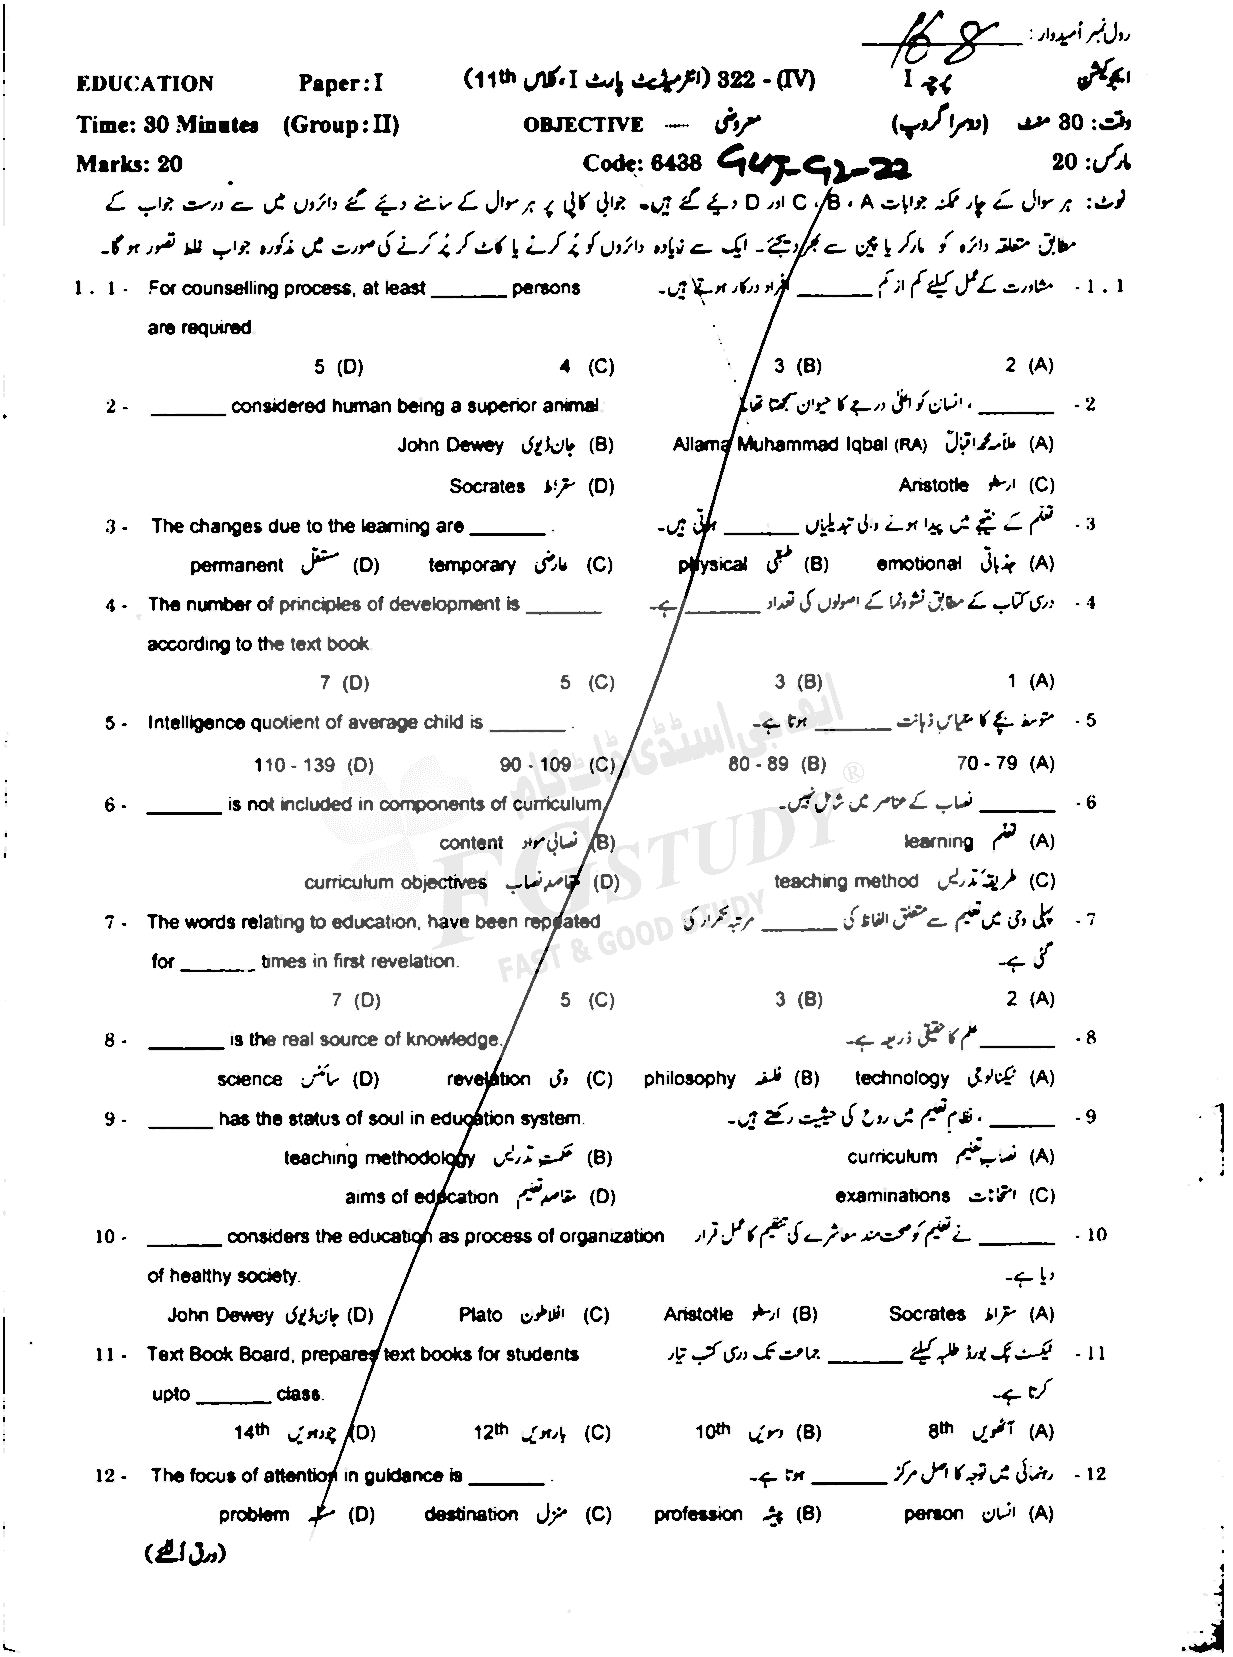 11th Class Education Past Paper 2022 Gujranwala Board Group 2 Objective